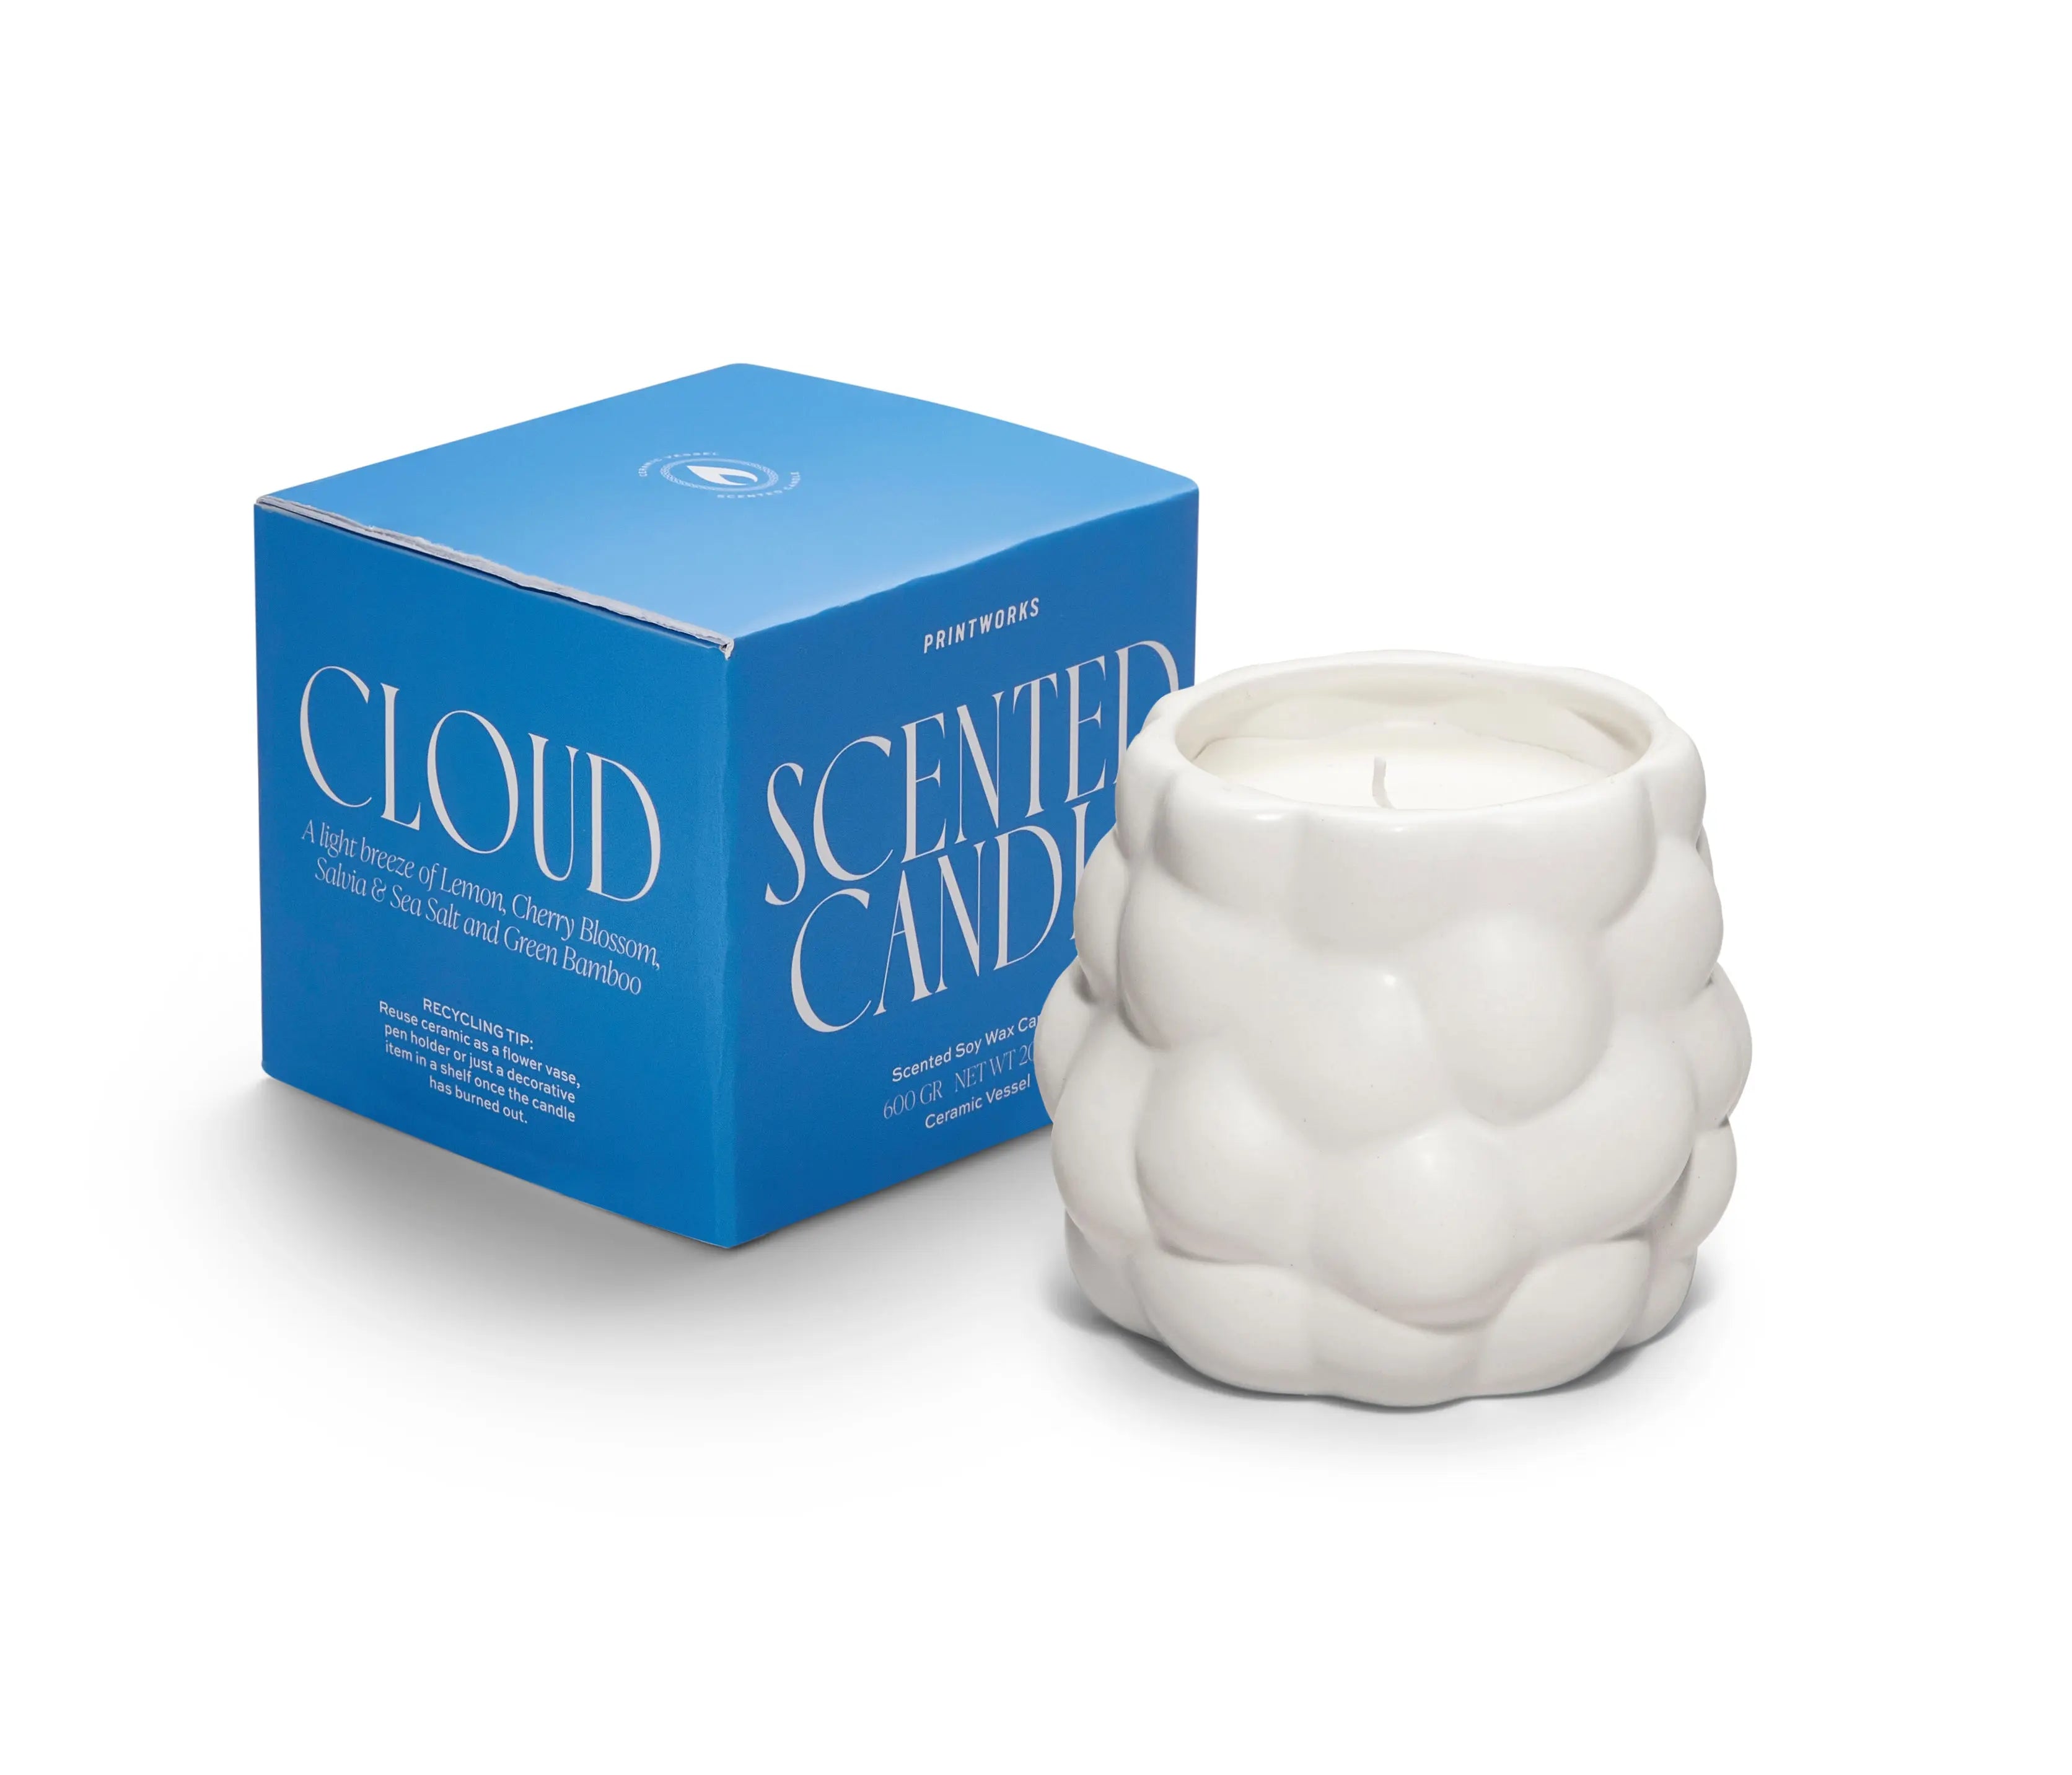 Cloud-Scented Candlea, Green Bamboo Aromatherapy, Relaxation Candle, Serenity Gift Scented Candle Printworks   